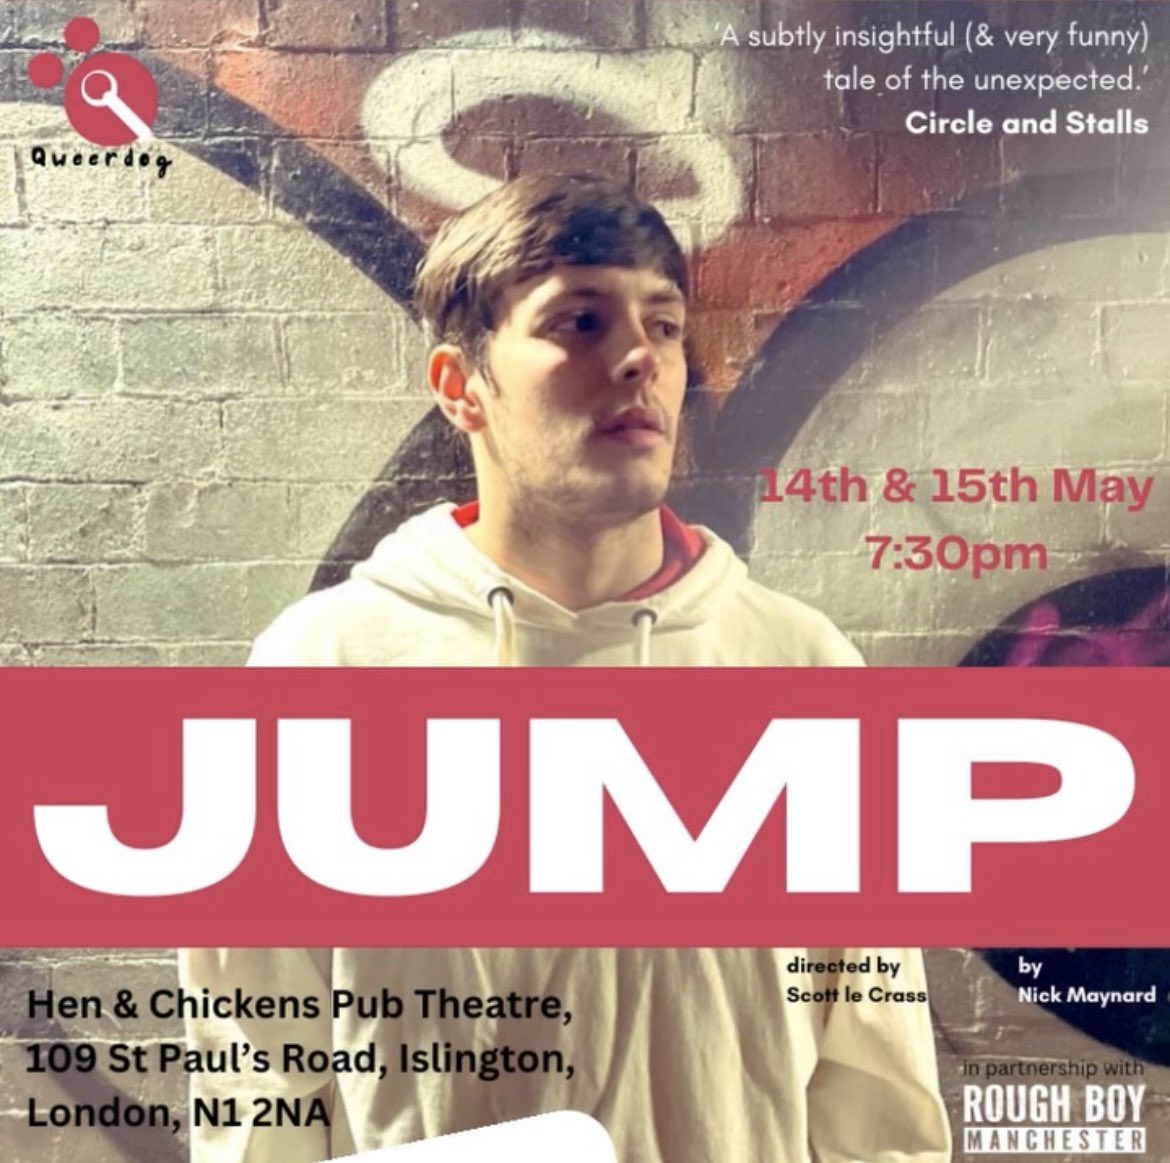 Just two weeks until @qweerdog’s JUMP, starring @AidenKane99, opens at @TheHenChickens in London. Good luck Aiden! 🌟

#JUMP #QweerdogTheatre #JHPM #proudagent #London #theatre